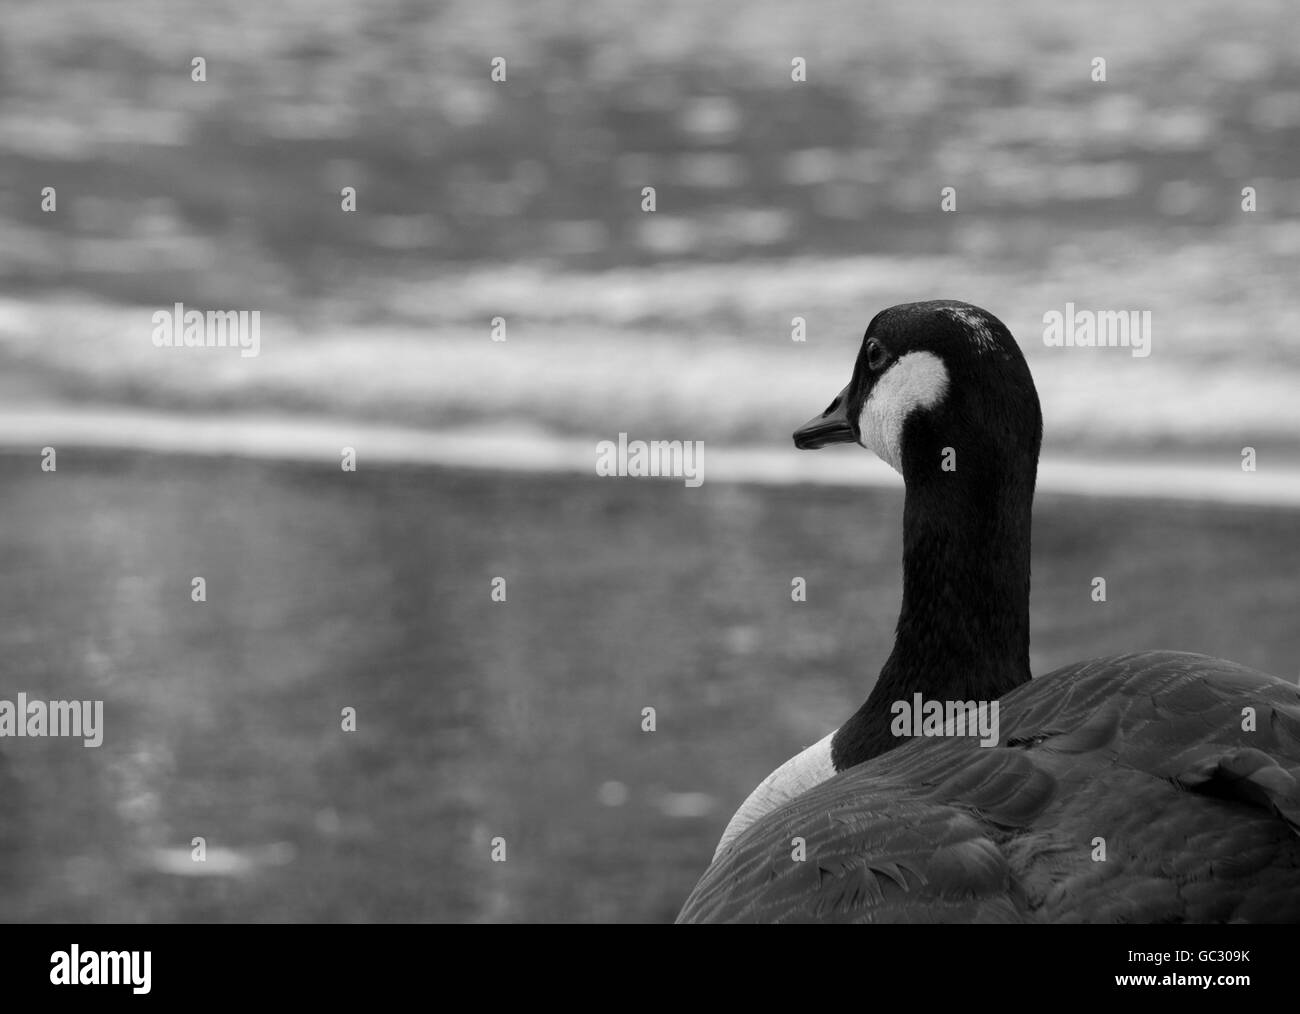 A Canadian Goose lost in thought Stock Photo